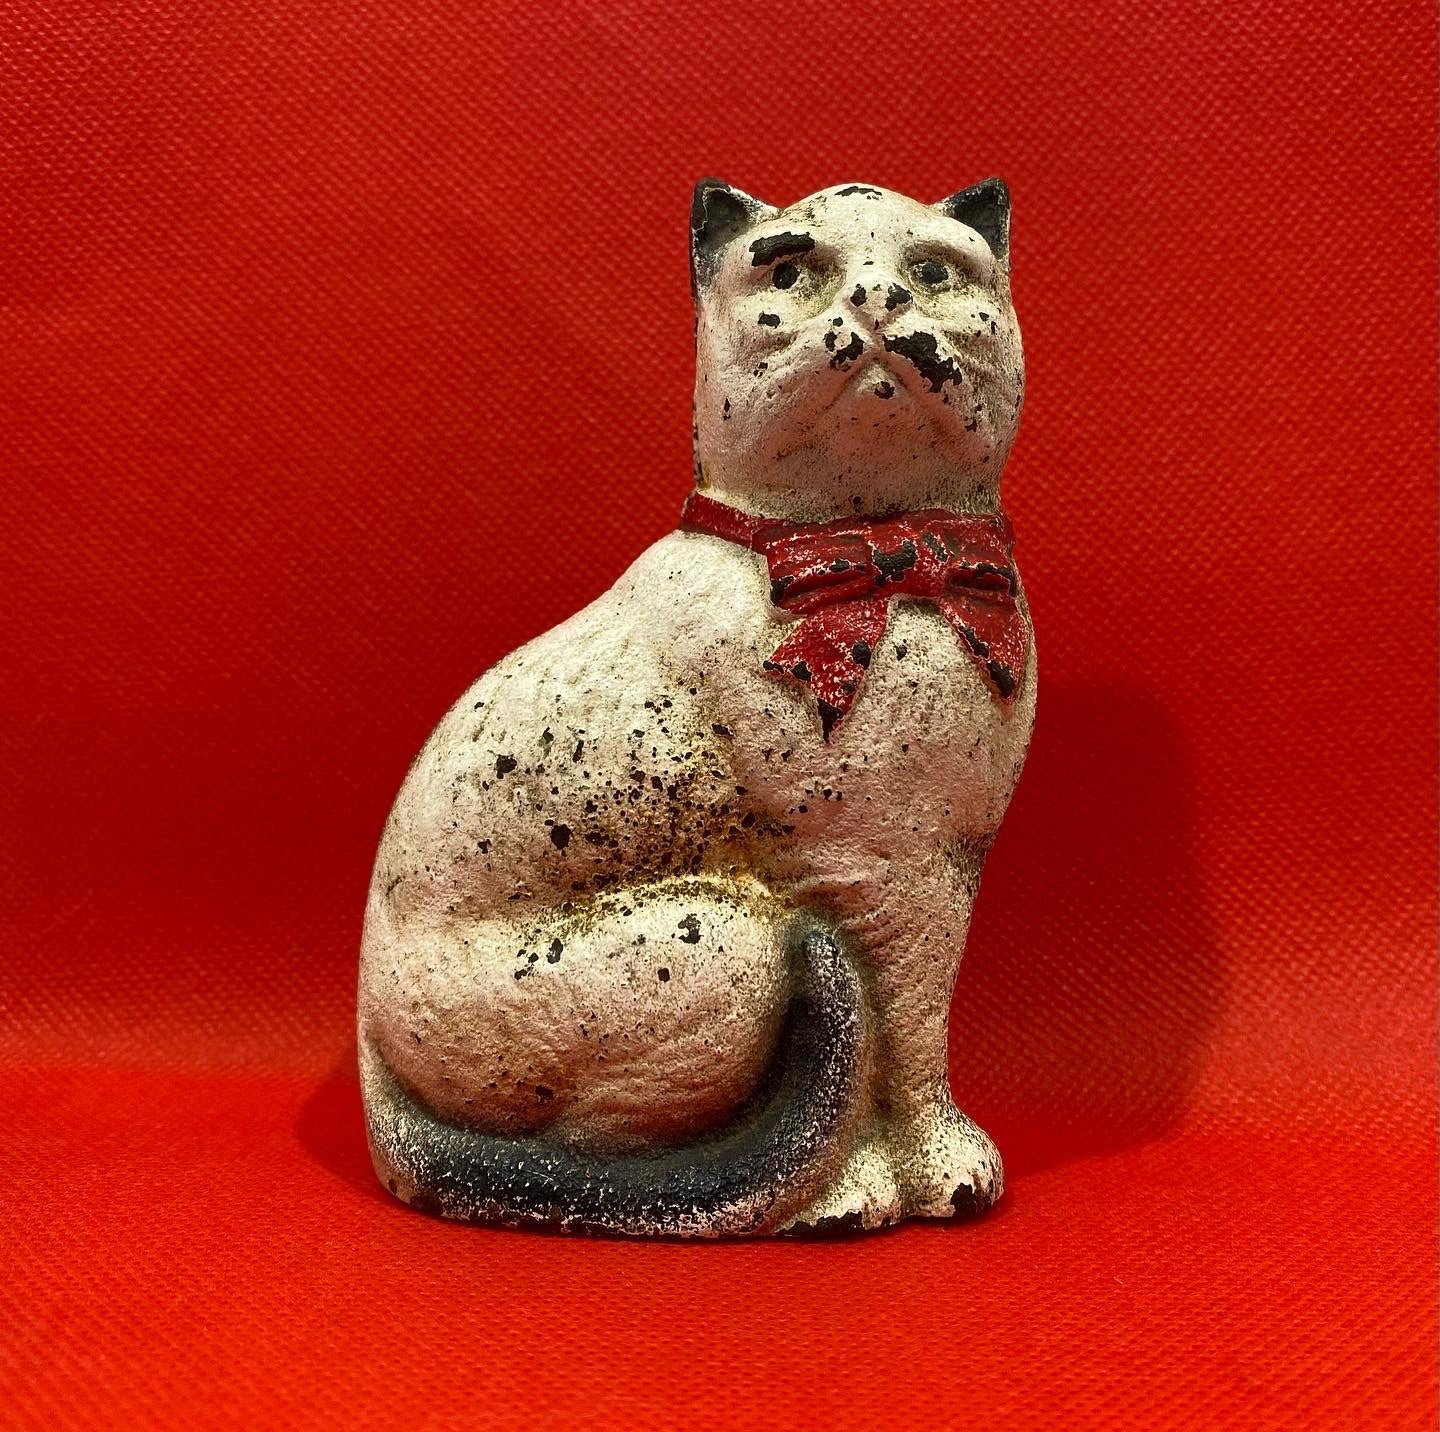 Antique, original, Cast Iron White Kat seated in profile coin bank, made by Hubley 1910s Very rare piece.